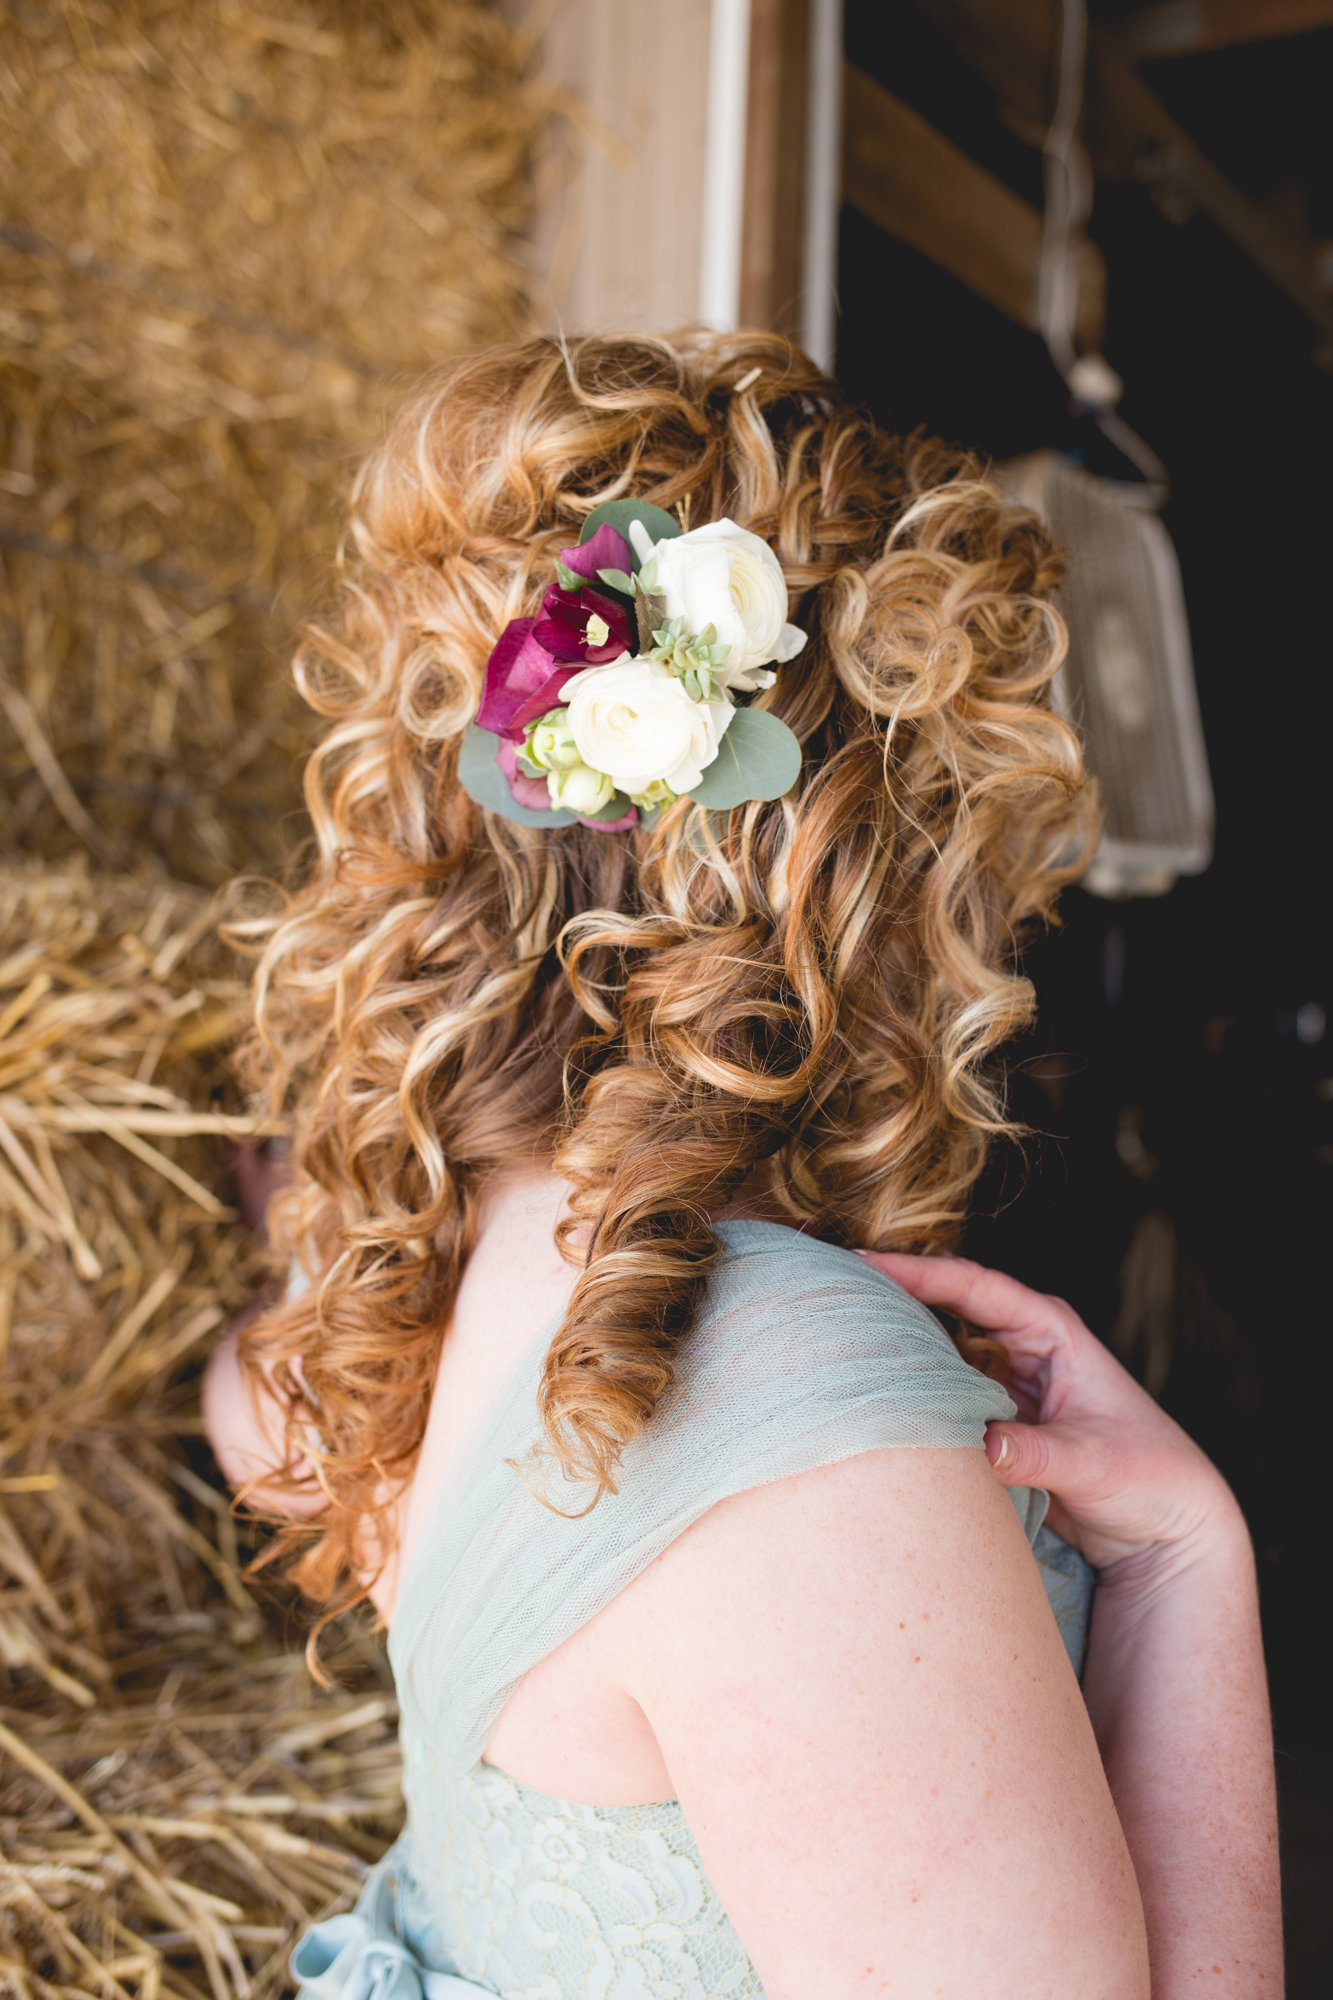 View More: http://katymurrayphotography.pass.us/katie